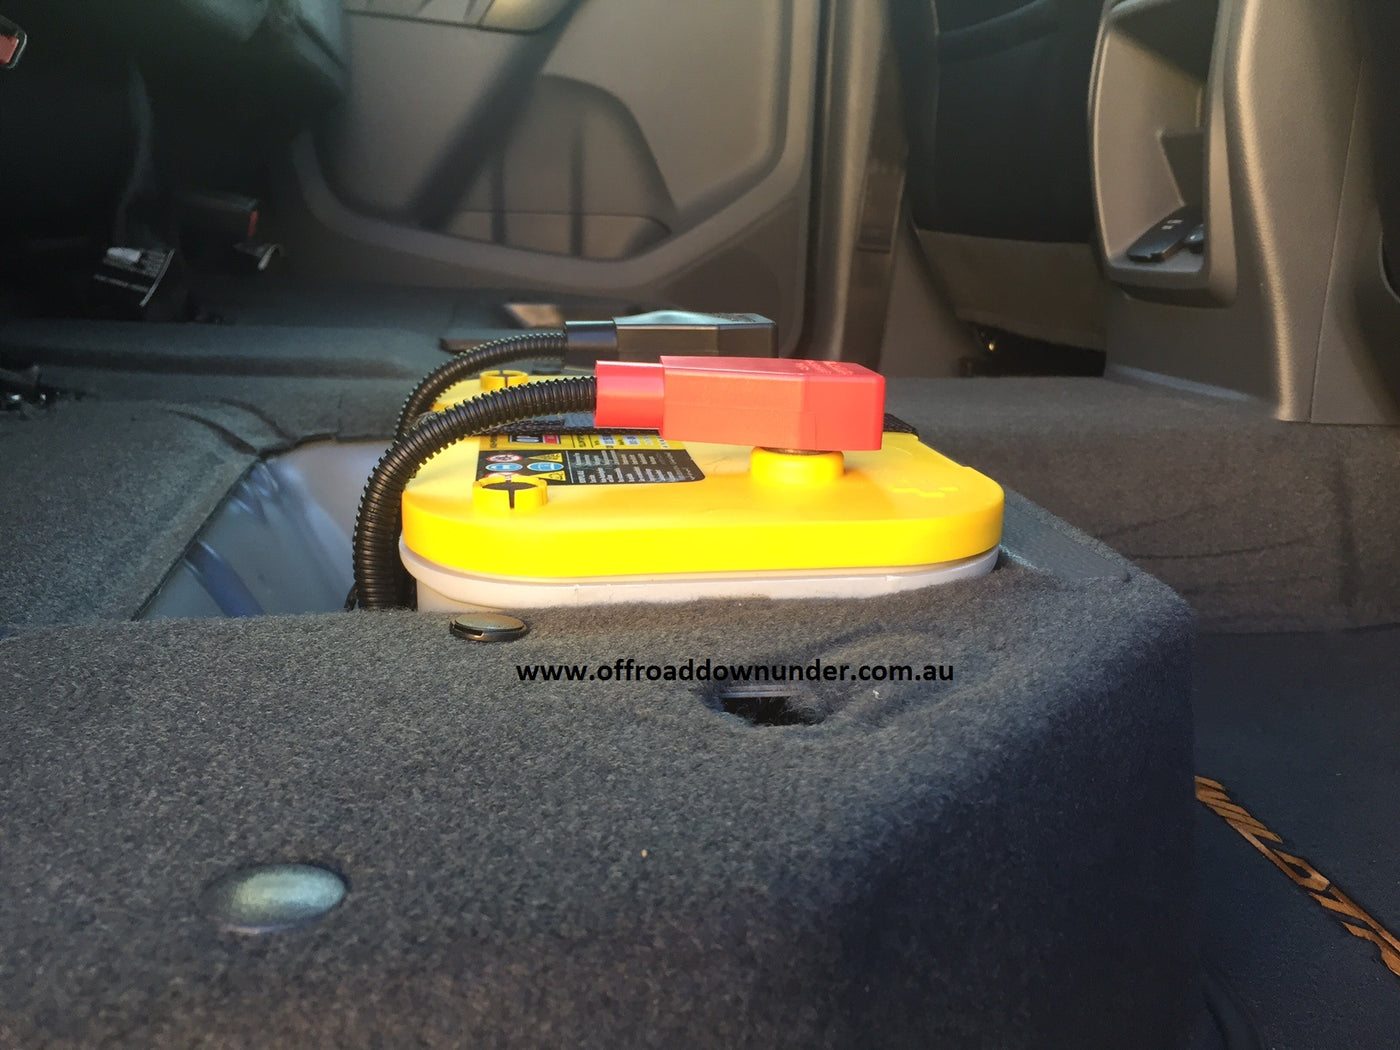 OFFROAD DOWNUNDER - Dual Battery Tray - To suit FORD Ranger 2011+ - Under rear seat model - MORE 4x4